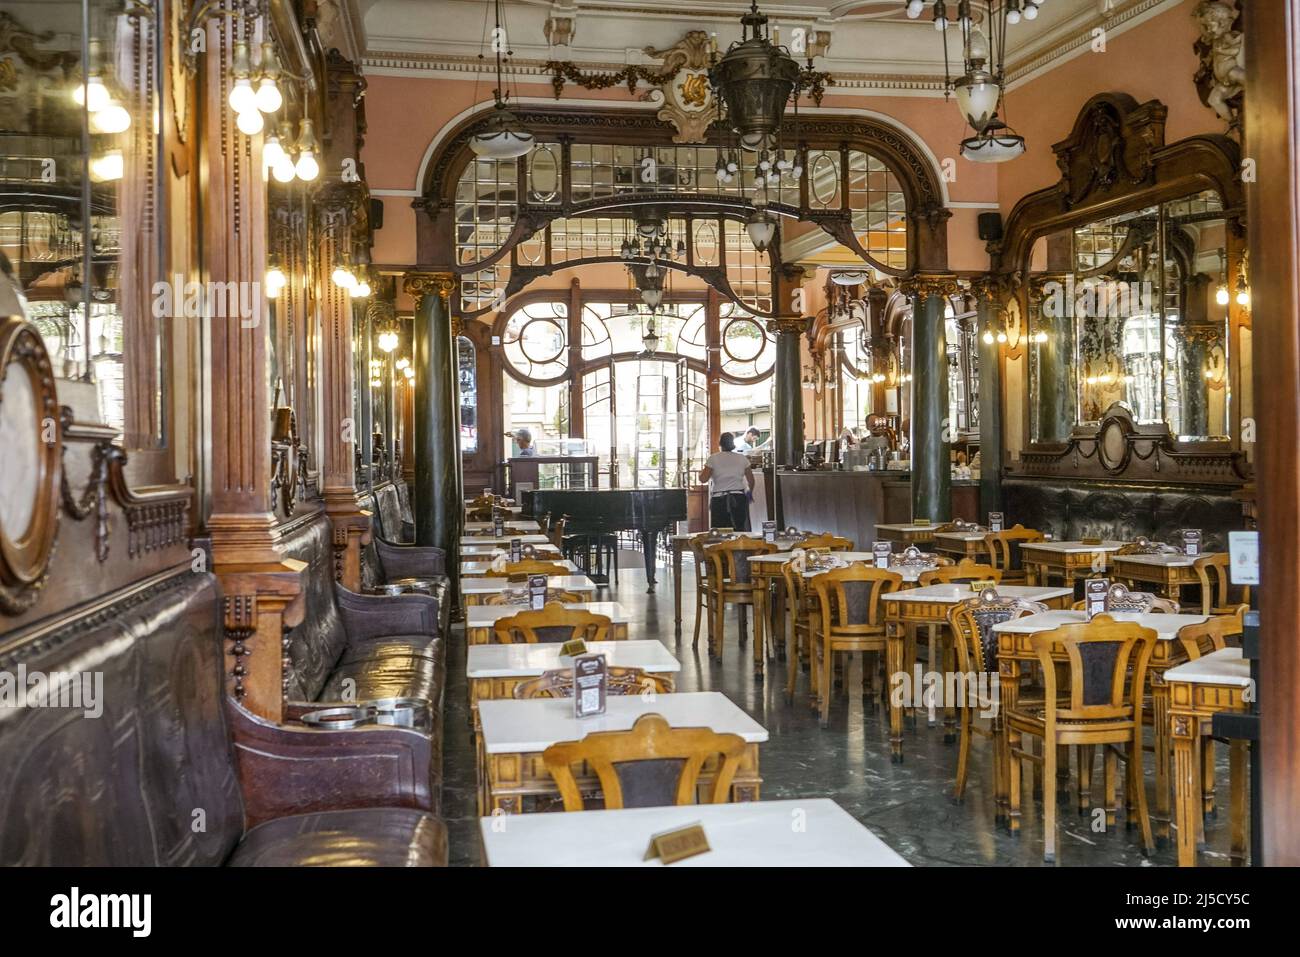 Portugal, Porto, 25.07.2020. Cafe Majestic in Porto on 25.07.2020. Cafe Majestic is a historic cafe in Porto. The building dates back to the Art Nouveau period and is reminiscent of the Parisian cafes of the time. The cafe experienced decades of decline until 1983, when it was classified as a building of national historic interest. After extensive restoration work, it reopened in July 1994 in its original Belle Époque style. Since the 1980s it has become an icon of Porto. [automated translation] Stock Photo